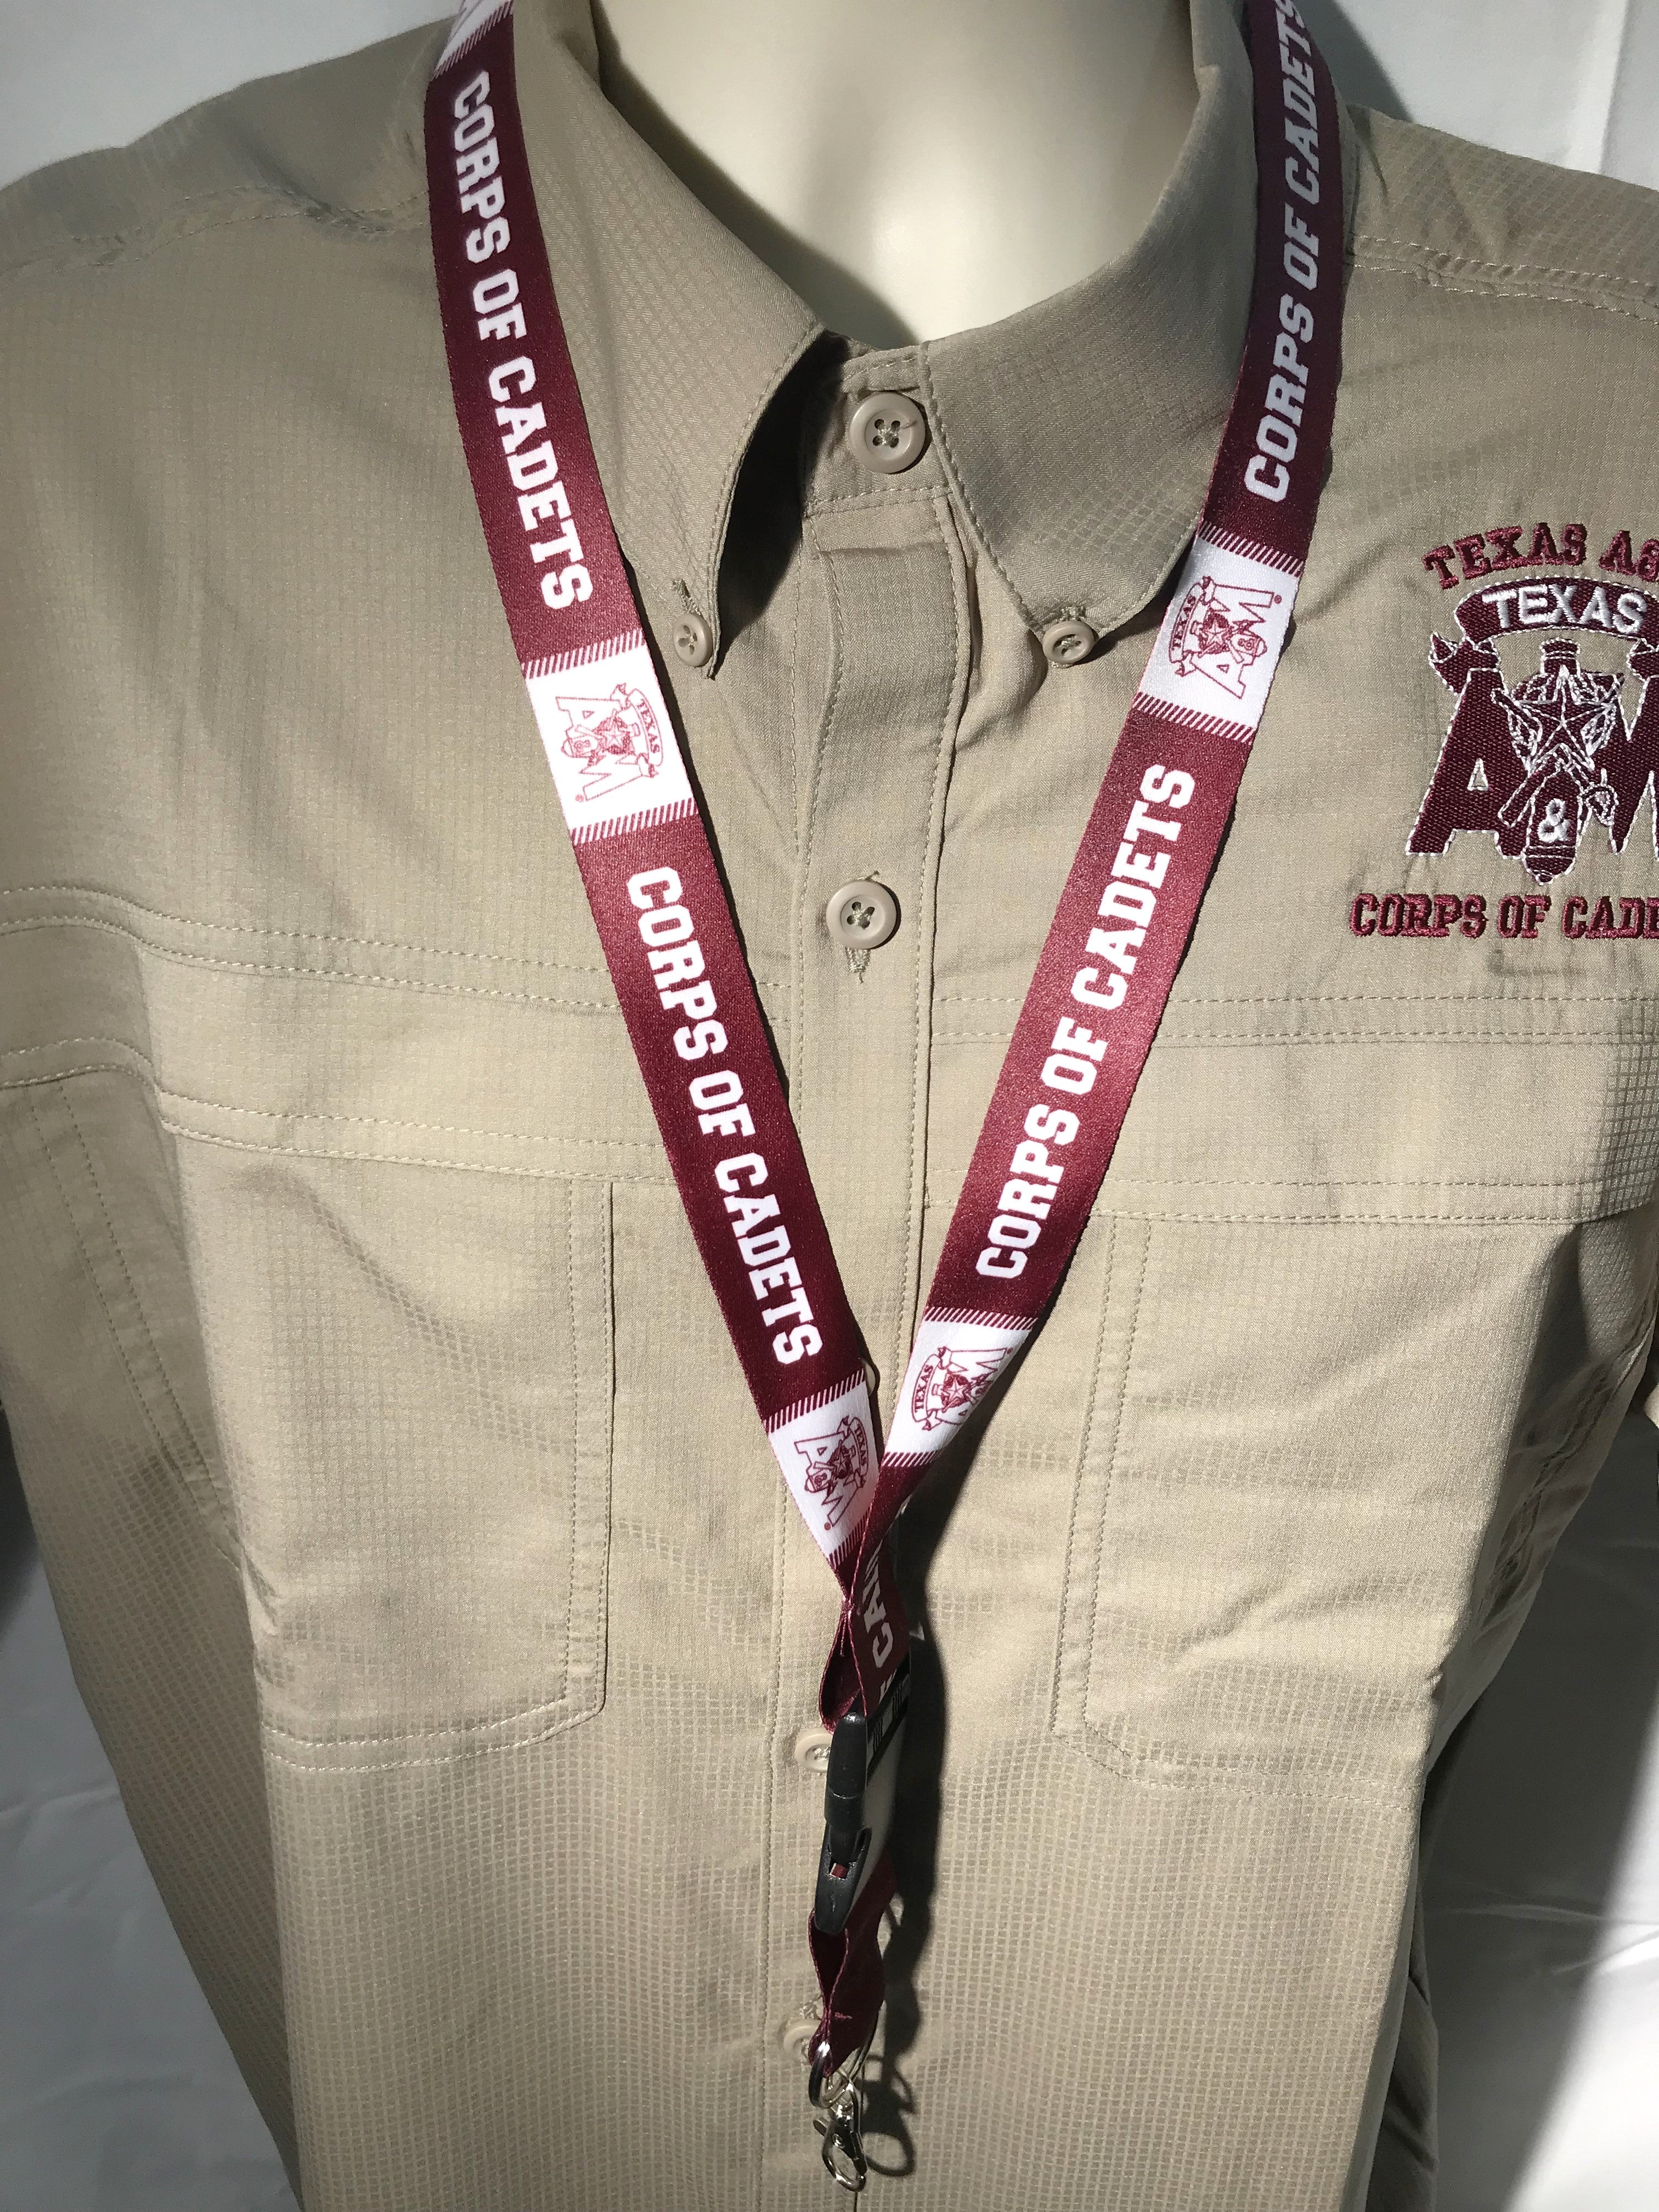 Lanyard With Corps of Cadets Logo